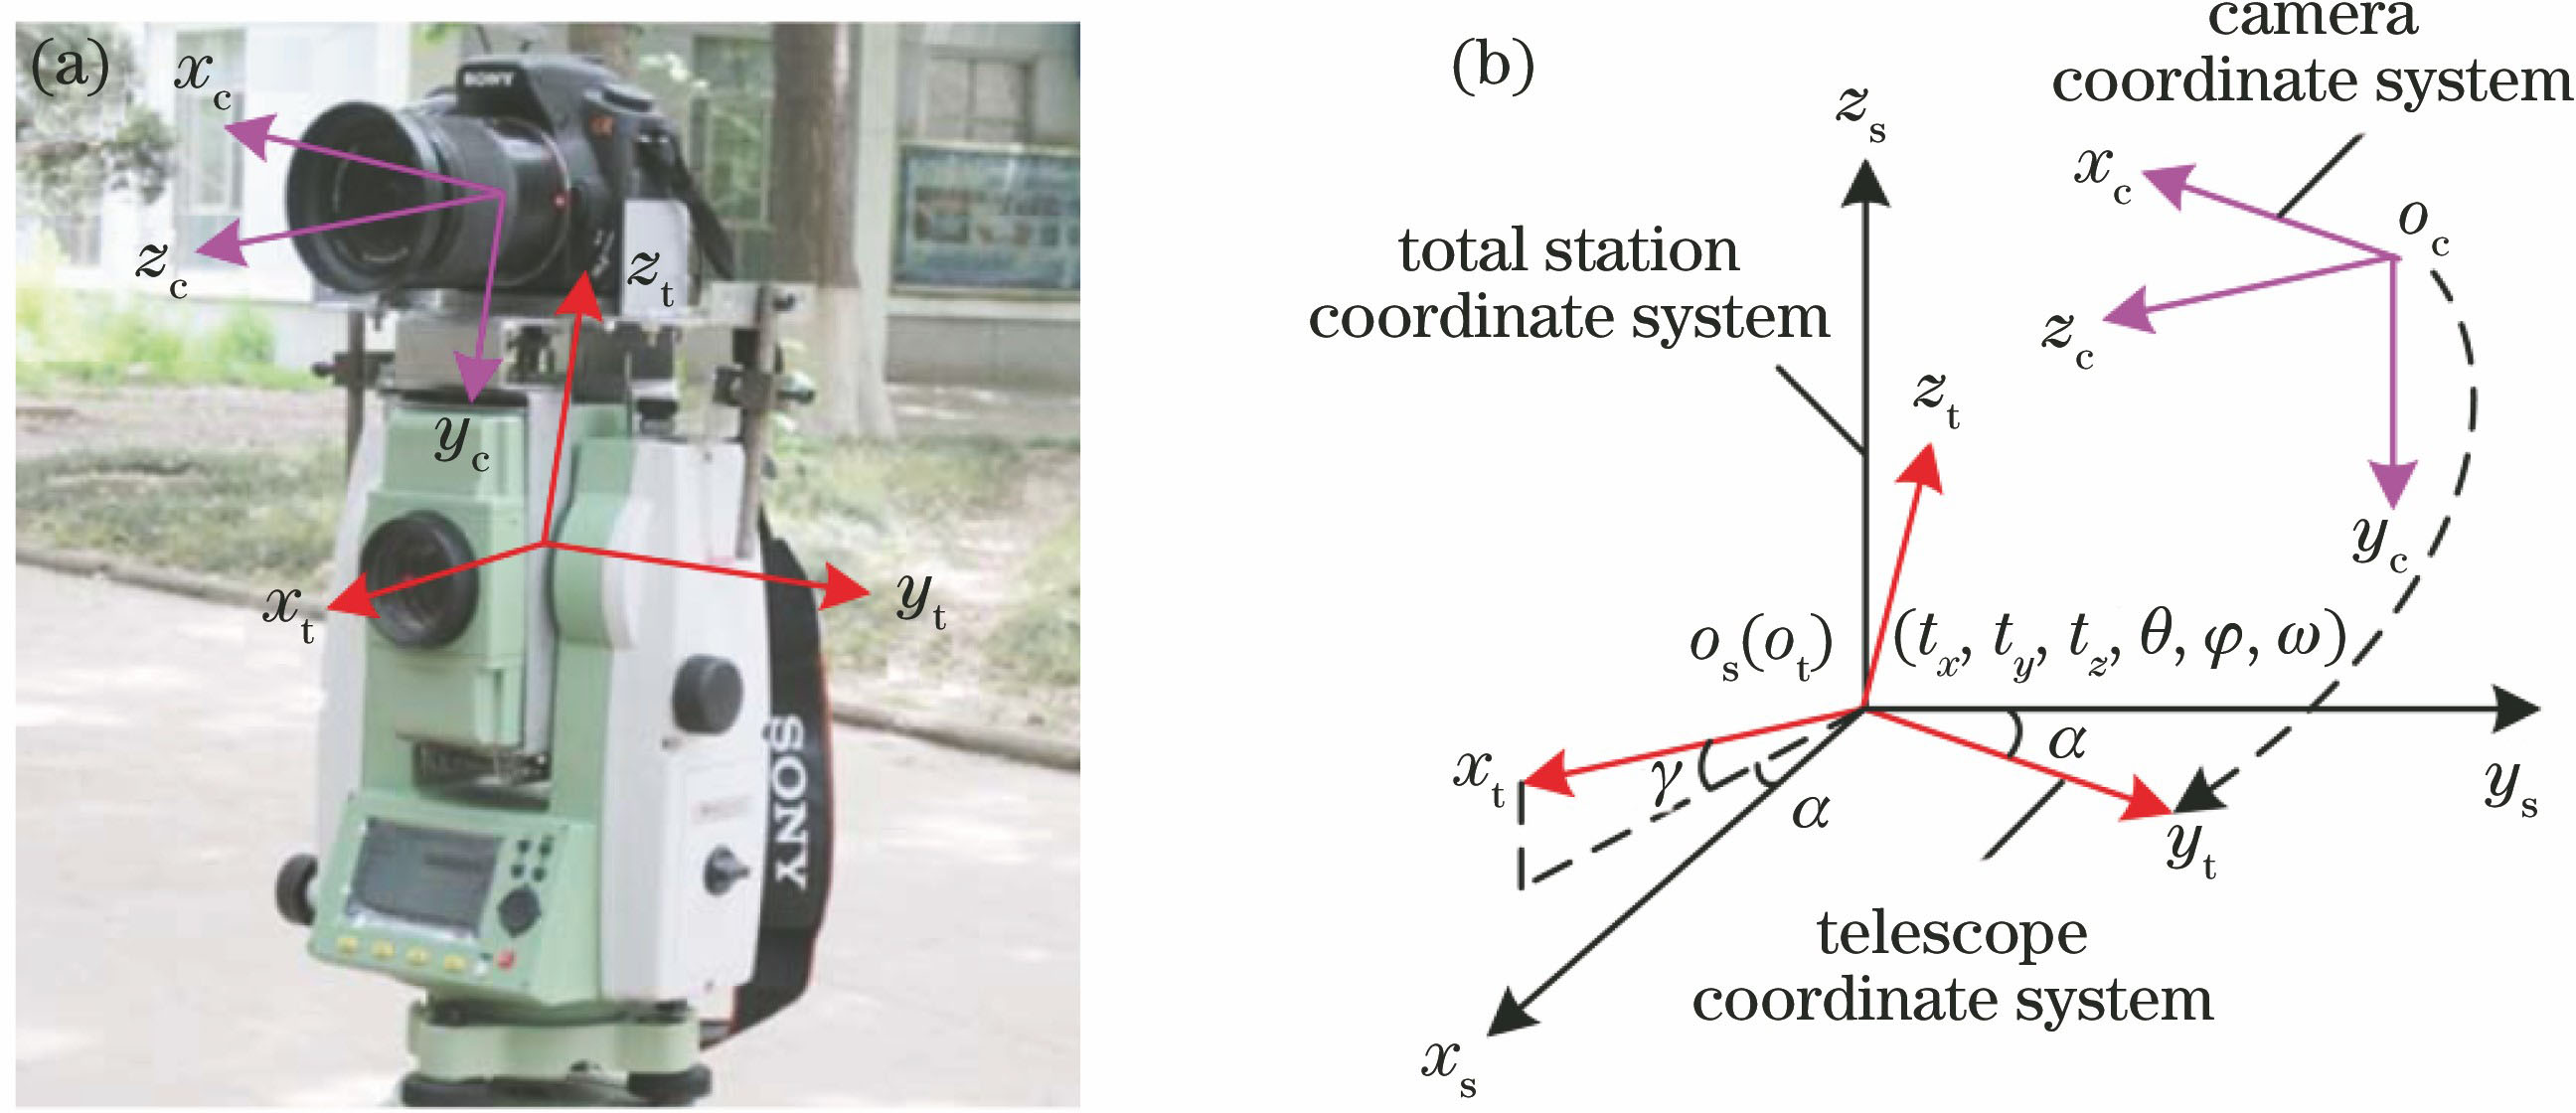 Coordinate systems of measurement system. (a) Camera coordinate system and telescope coordinate system; (b) relationship between camera coordinate system, telescope coordinate system, and total station coordinate system